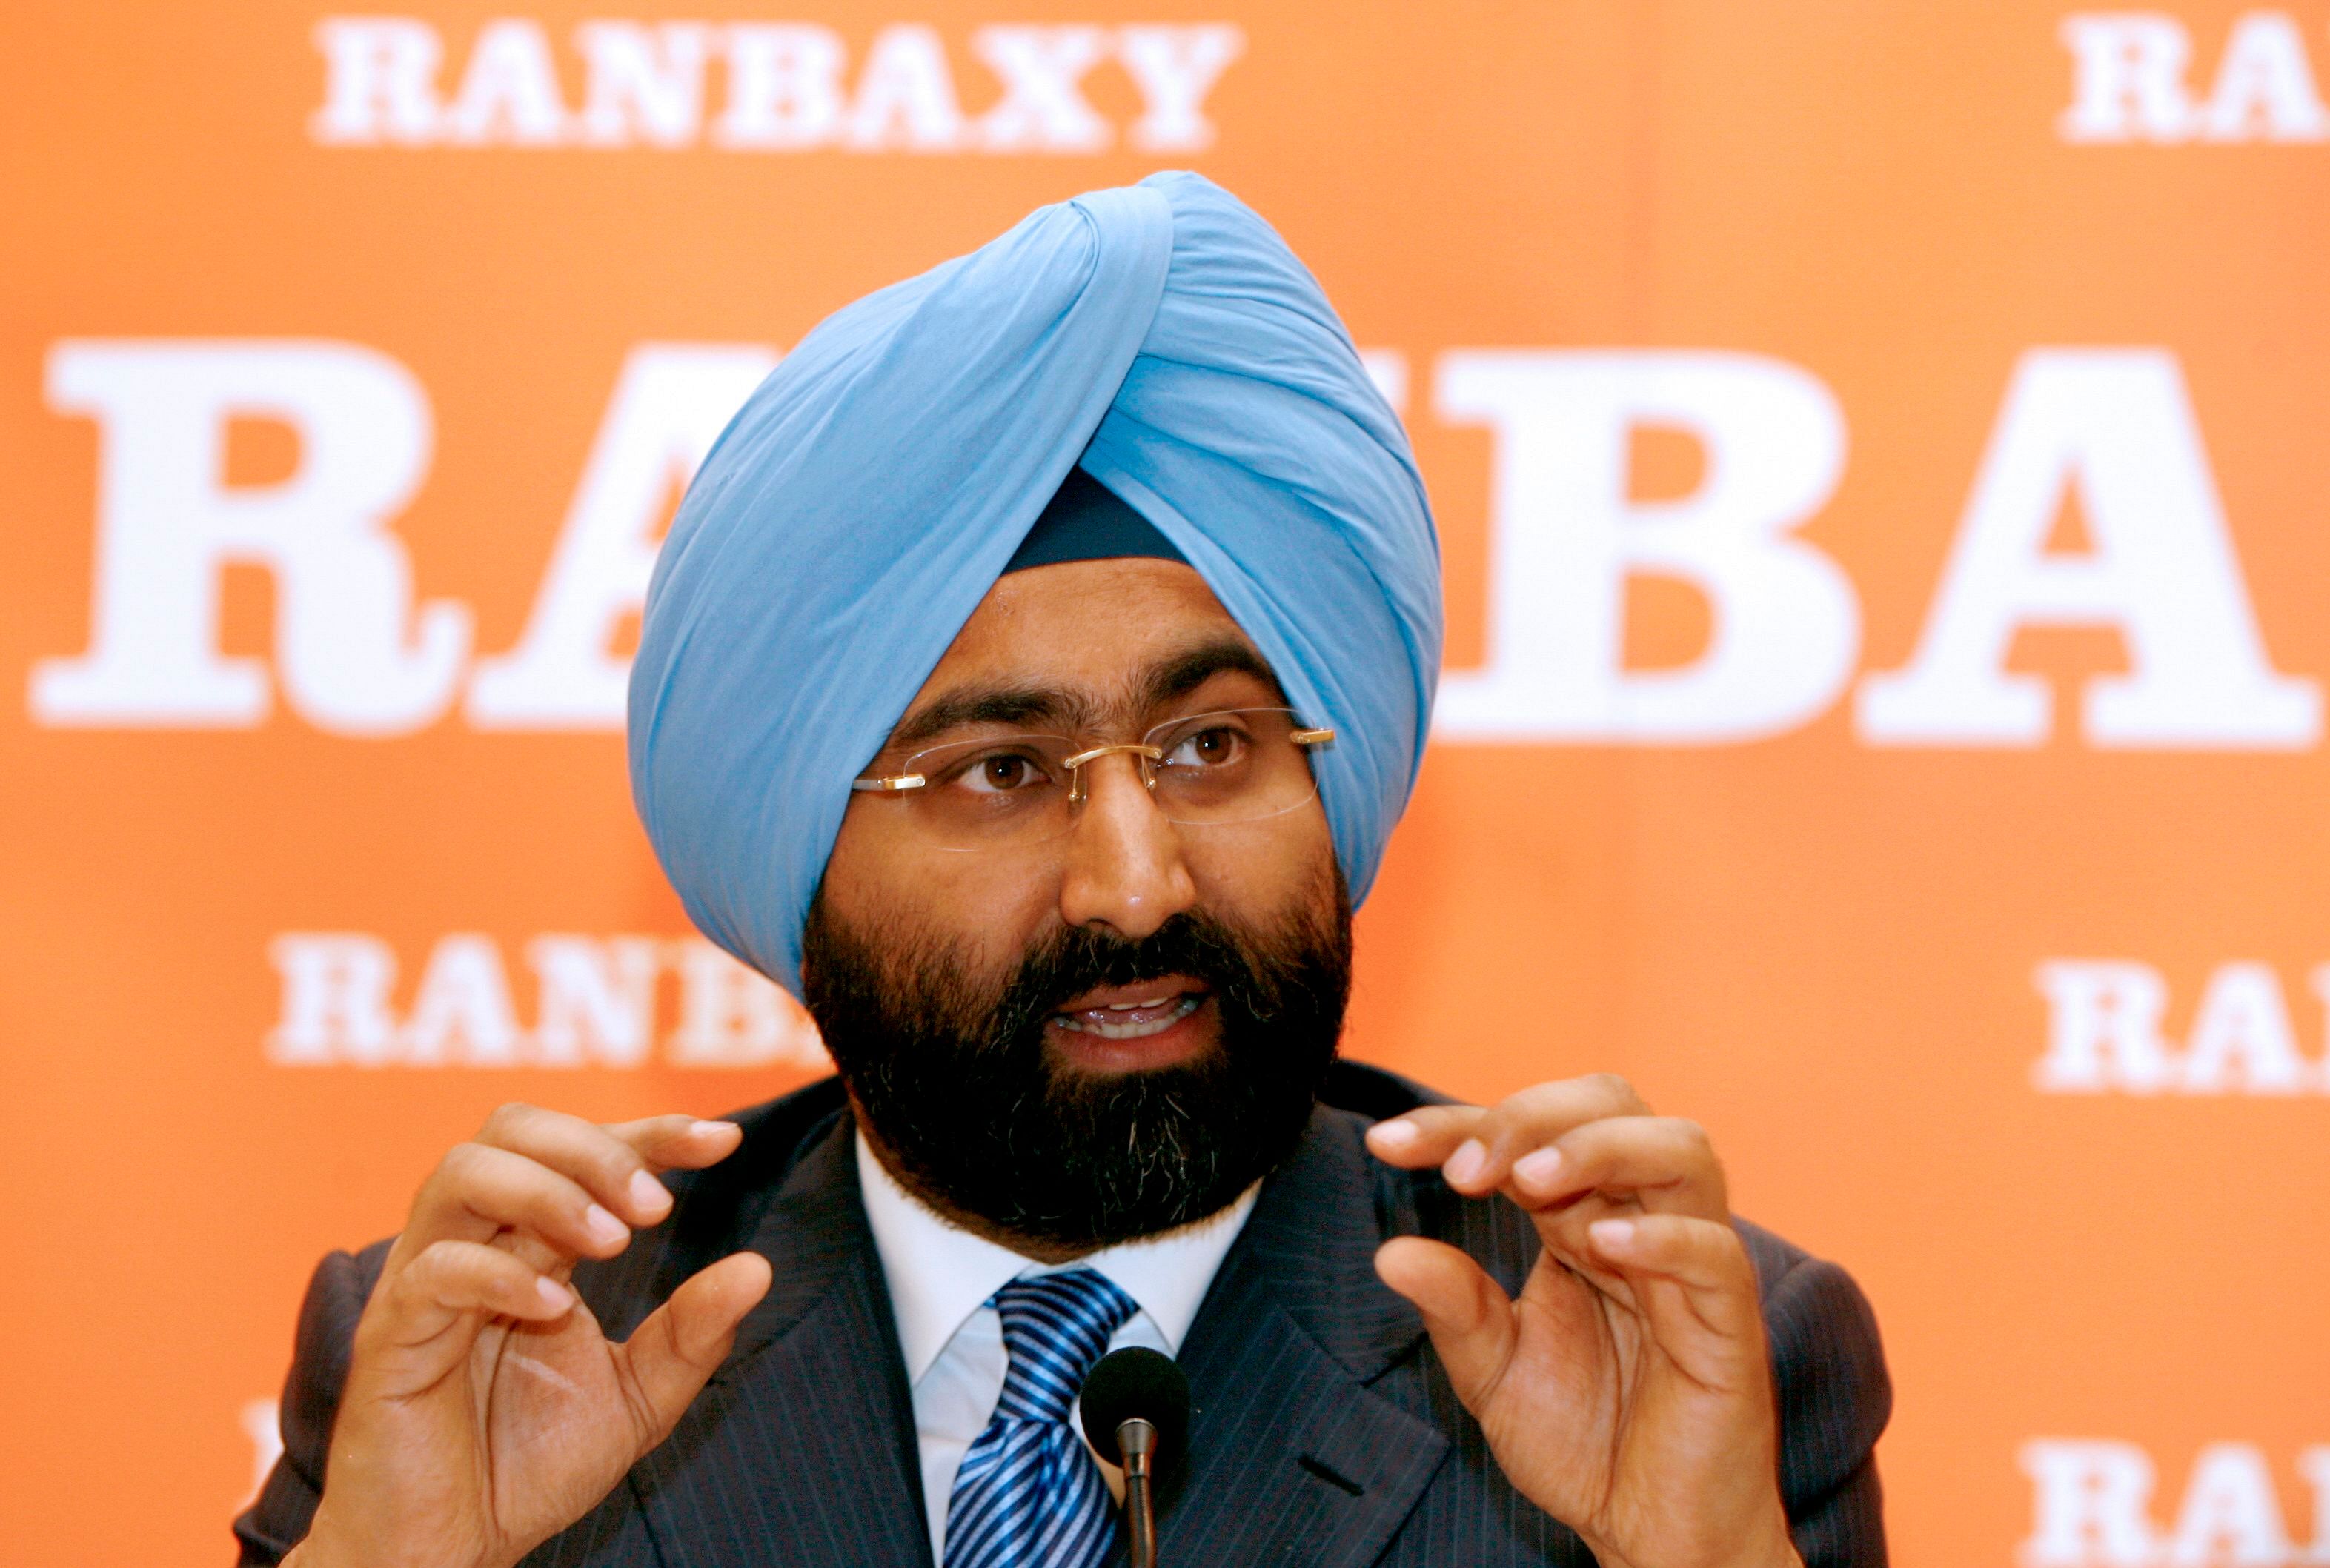 Former Chief Executive Officer and Managing Director of Indian pharmaceutical company Ranbaxy, Malvinder Singh